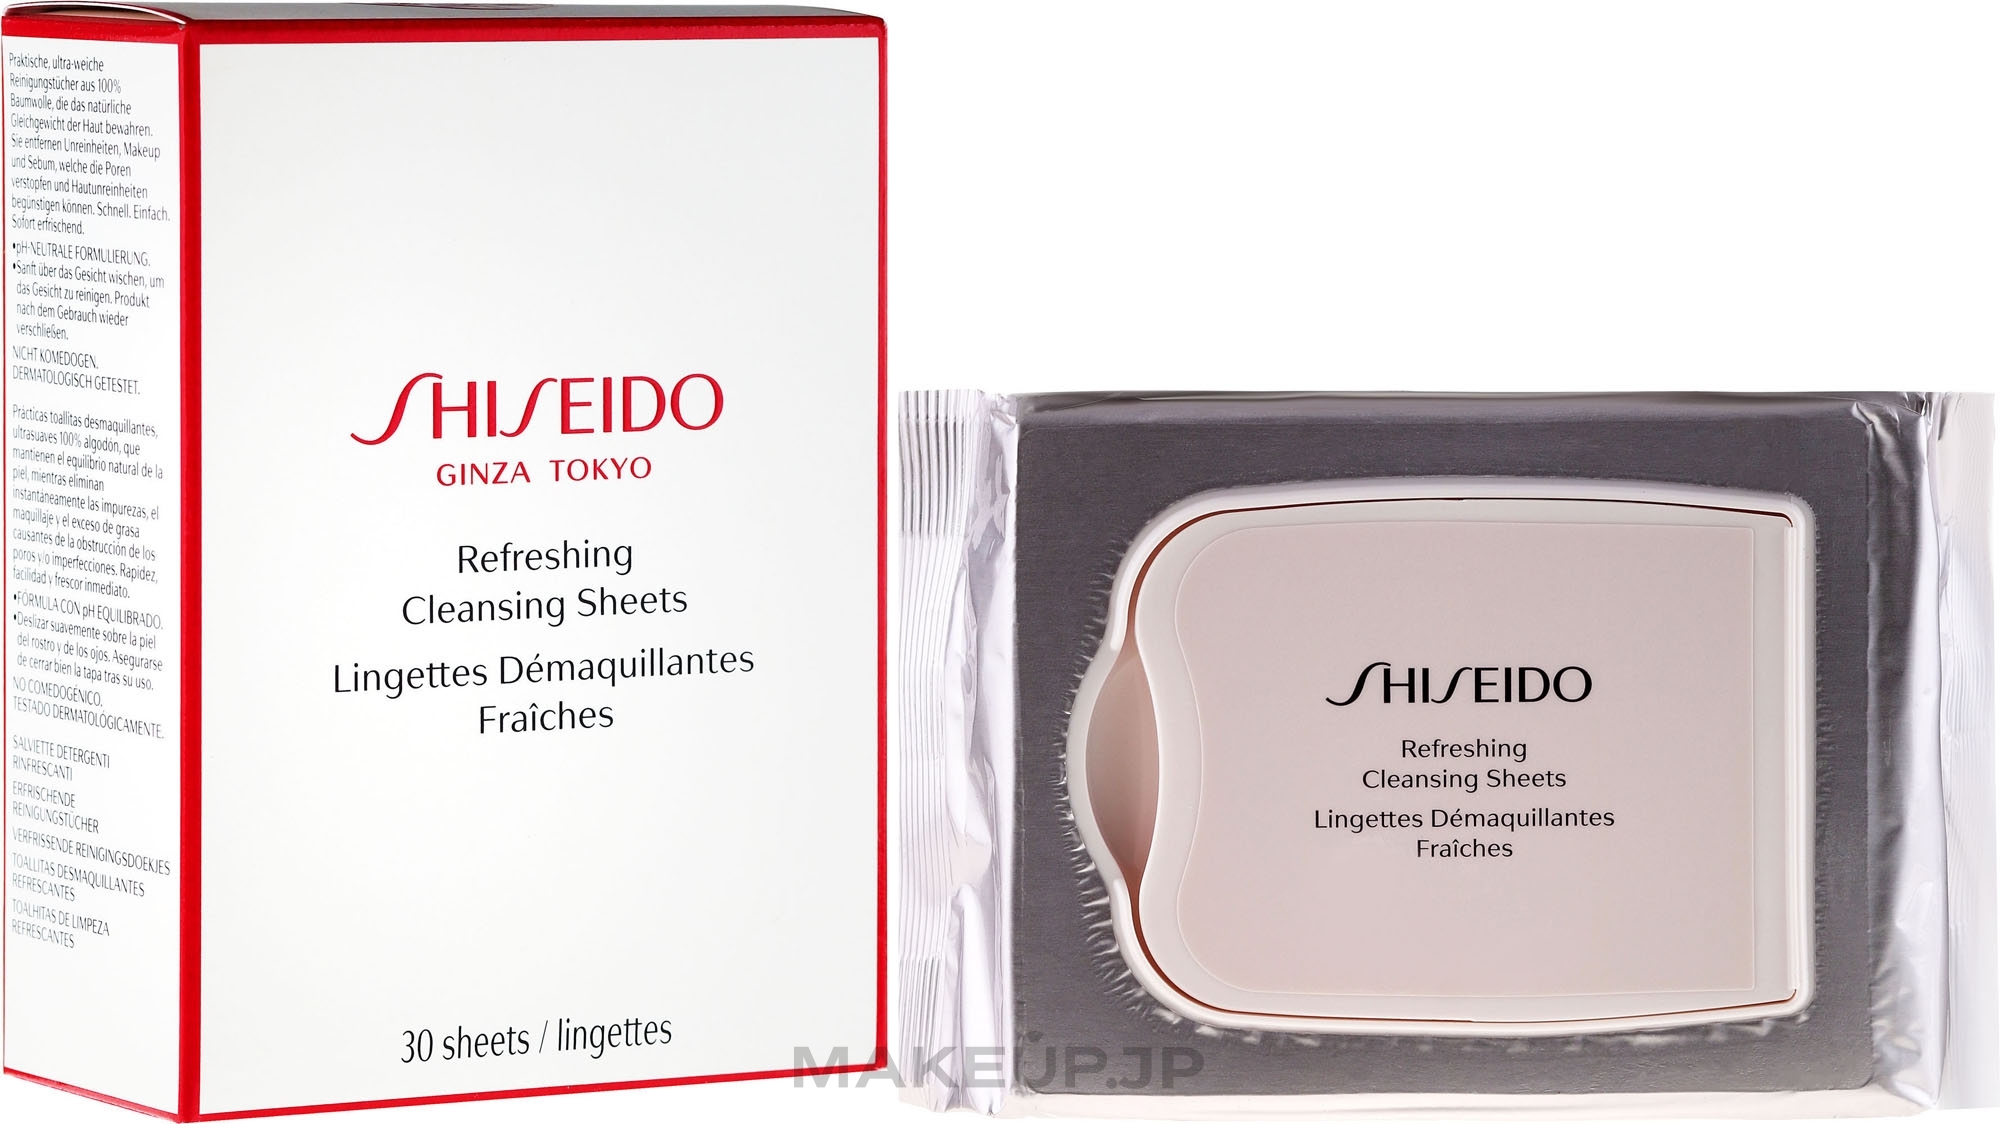 Refreshing Cleansing Wipes - Shiseido Refreshing Cleansing Sheets — photo 30 szt.